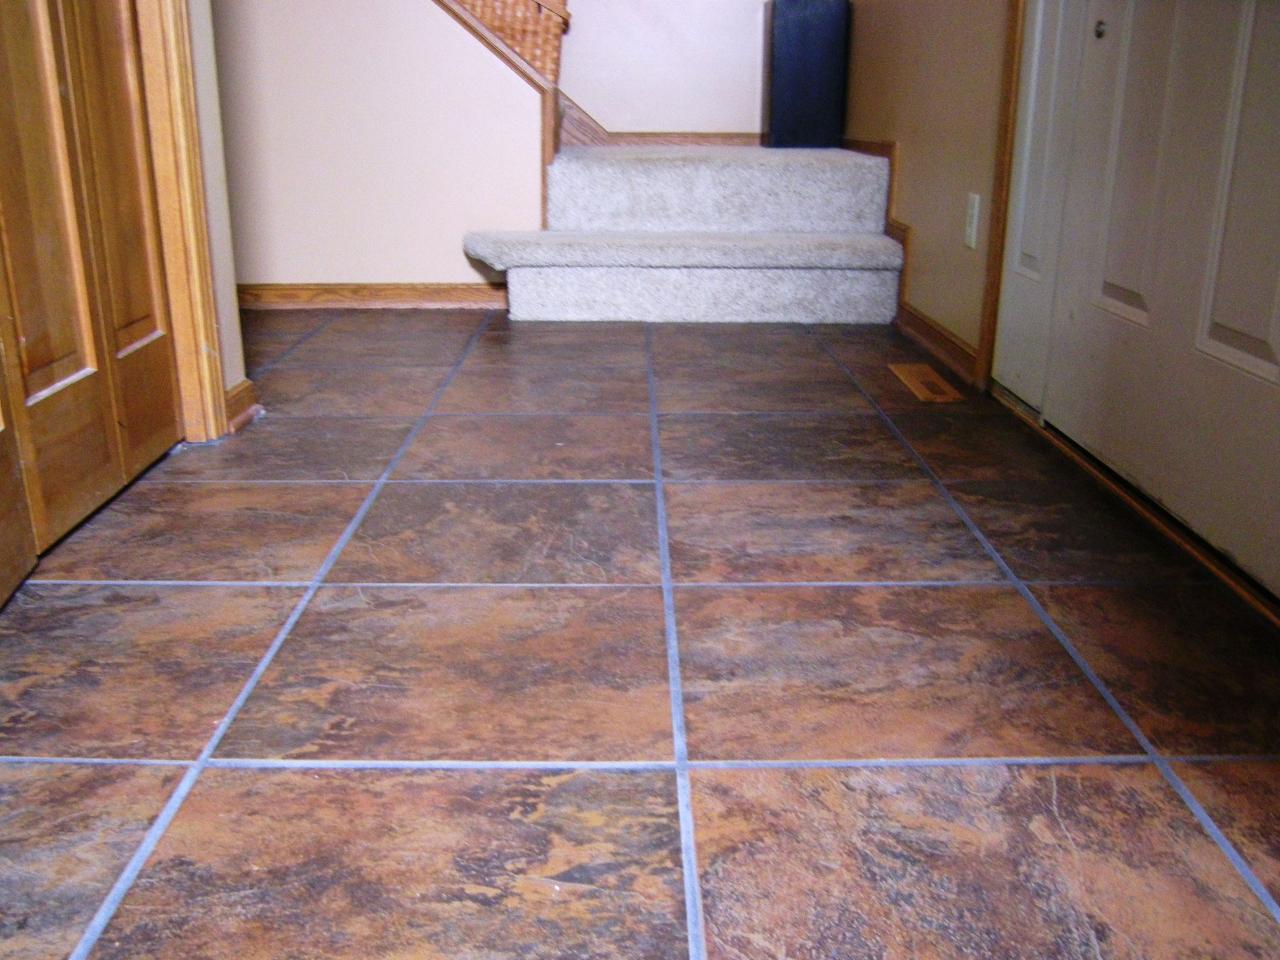 Laying a New Tile Floor  how-tos  DIY